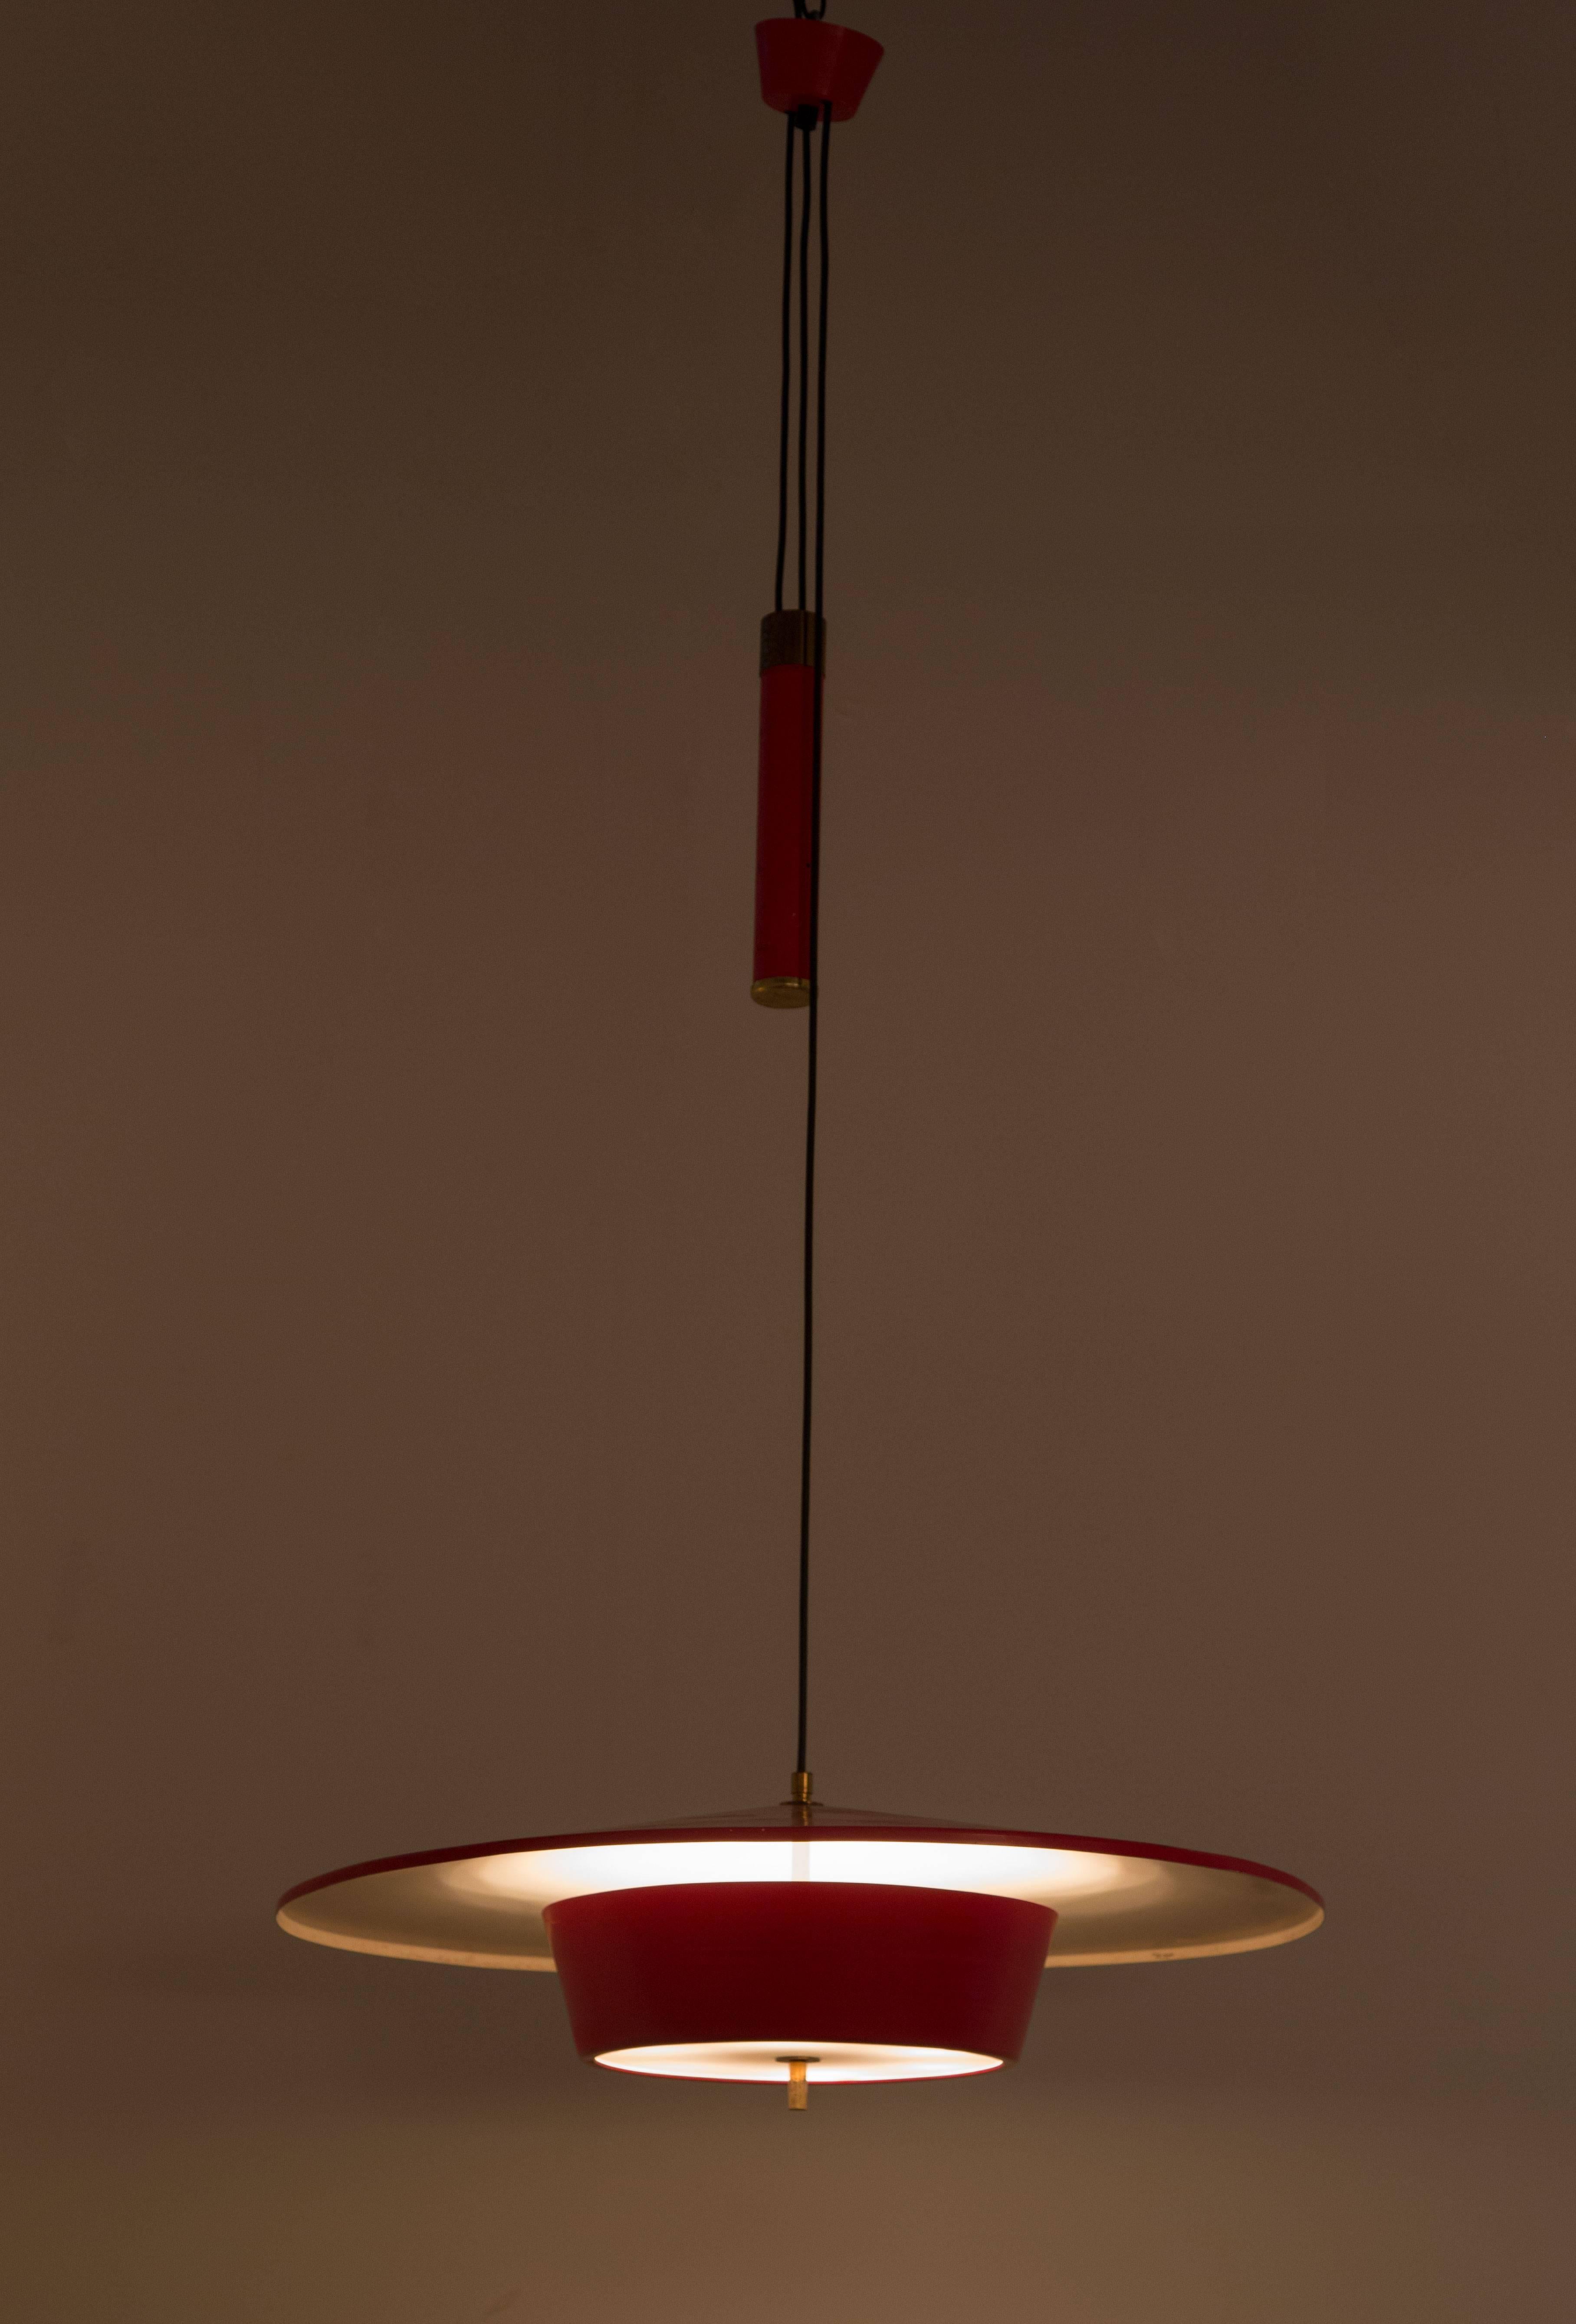 Counterweight pendant by Stilux Milano. Solid metal counterweight with brass accents allows the light to adjust in height. Acrylic diffuser with brass finial. Shades fully restored. E27 75w maximum bulb.